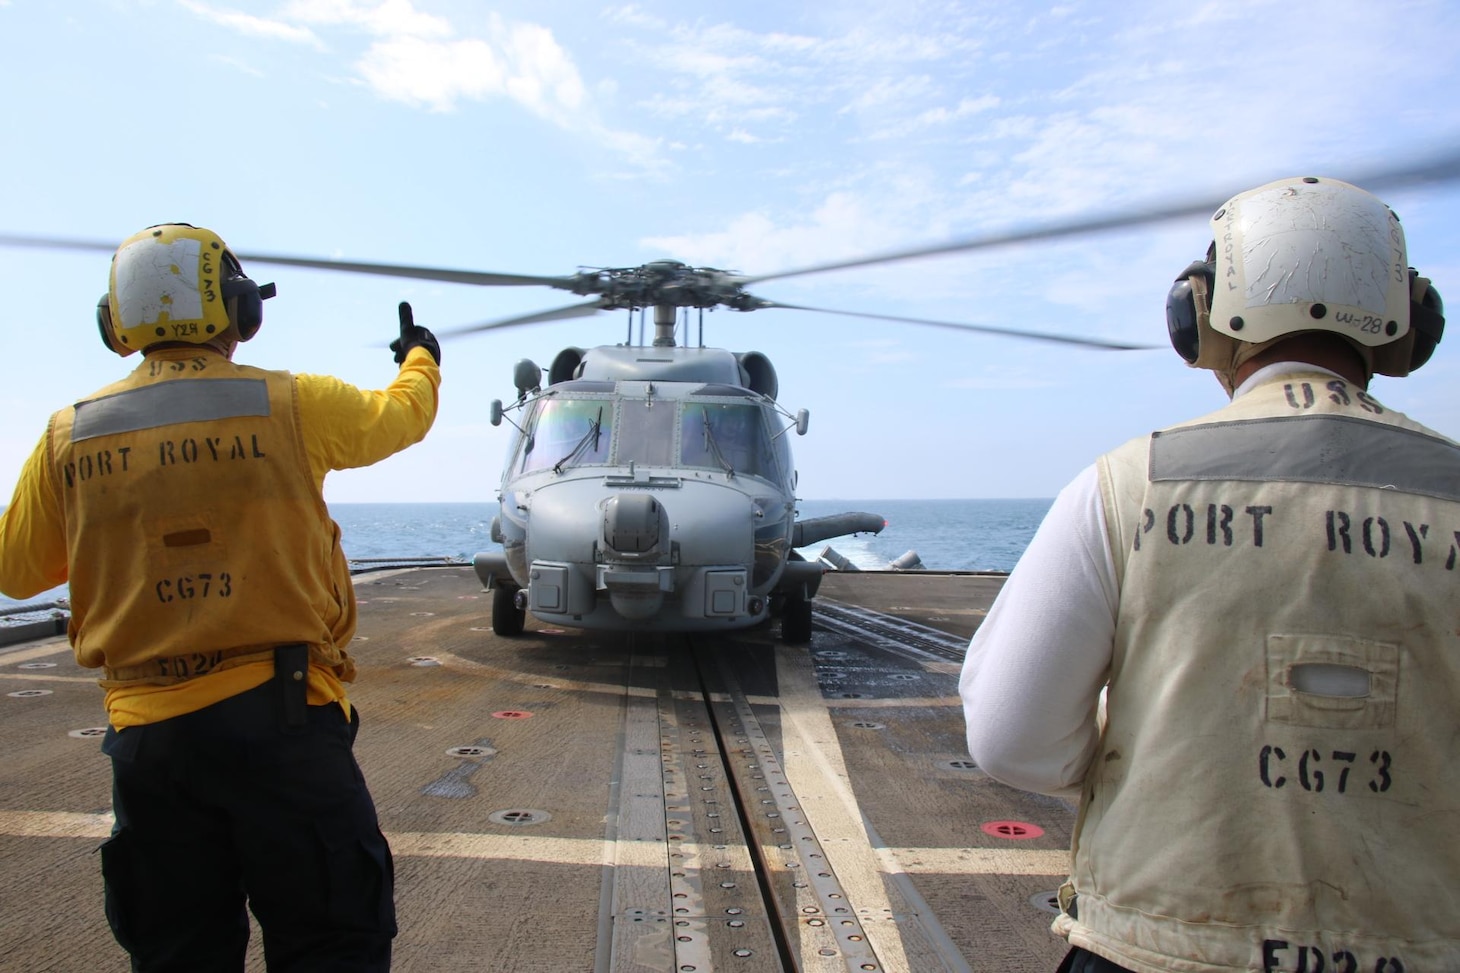 220510-N-NO824-1011 TAIWAN STRAIT (May 10, 2022) Boatswain’s Mate 2nd Class Olivo, from Lot, Oklahoma, and Boatswain’s Mate 1st Class Michael Bergado from Ewa Beach, Hawaii, signals takeoff to the pilot of an MH-60R Sea Hawk helicopter, attached to the “Easyriders” of Helicopter Maritime Strike Squadron (HSM) 37, during flight quarters aboard the Ticonderoga-class guided-missile cruiser USS Port Royal (CG 73) as the ship conducts a routine Taiwan Strait transit May 10. Port Royal is forward-deployed to the 7th Fleet area of operations in support of a free and open Indo-Pacific. (U.S. Navy photo by Ensign Jessika Stanback)